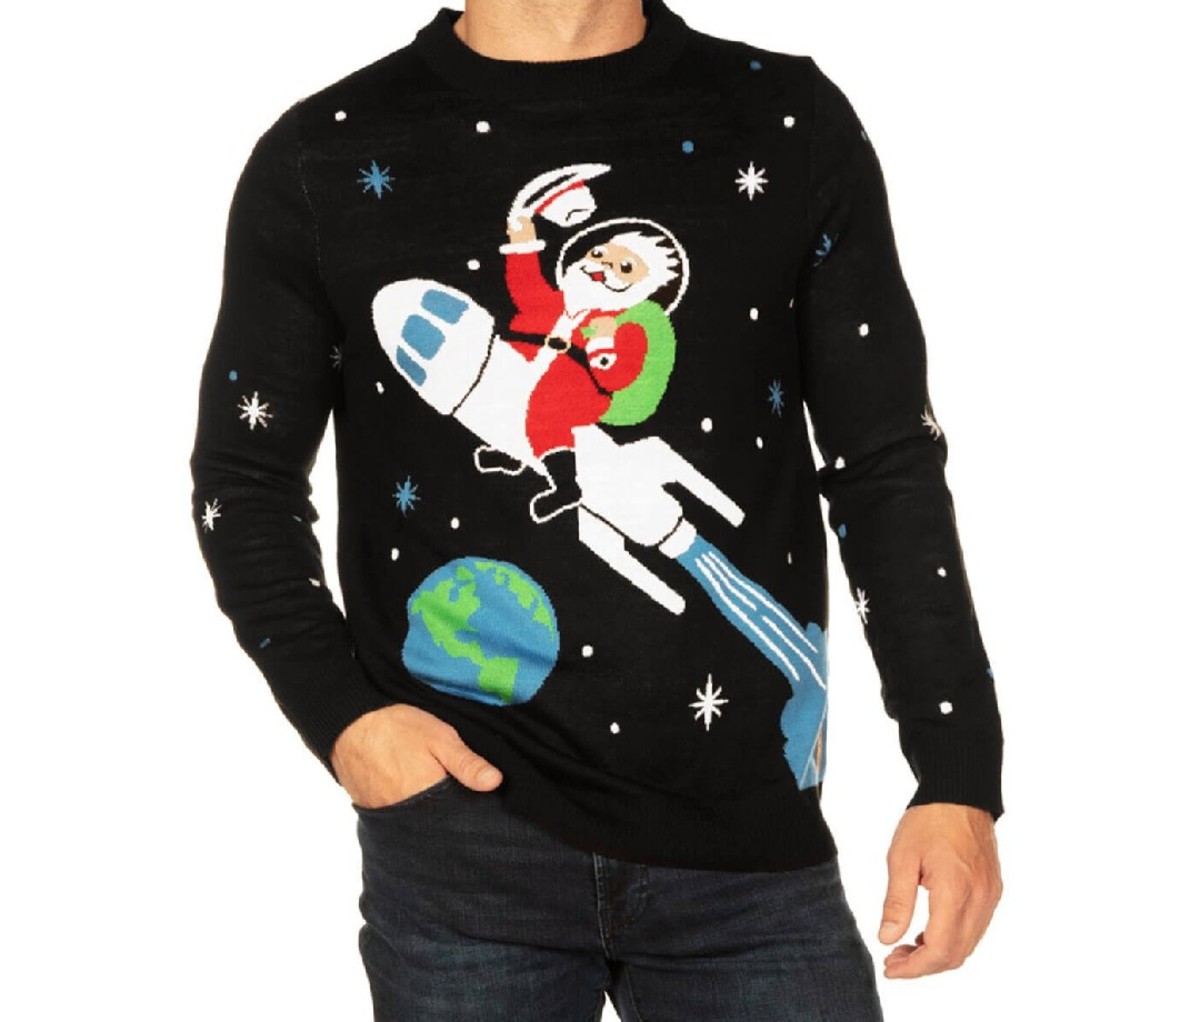 Black-based, Santa-themed Tipsy Elves Men's Bezos Blue Origin 'You Paid For This' Ugly Christmas Sweater 